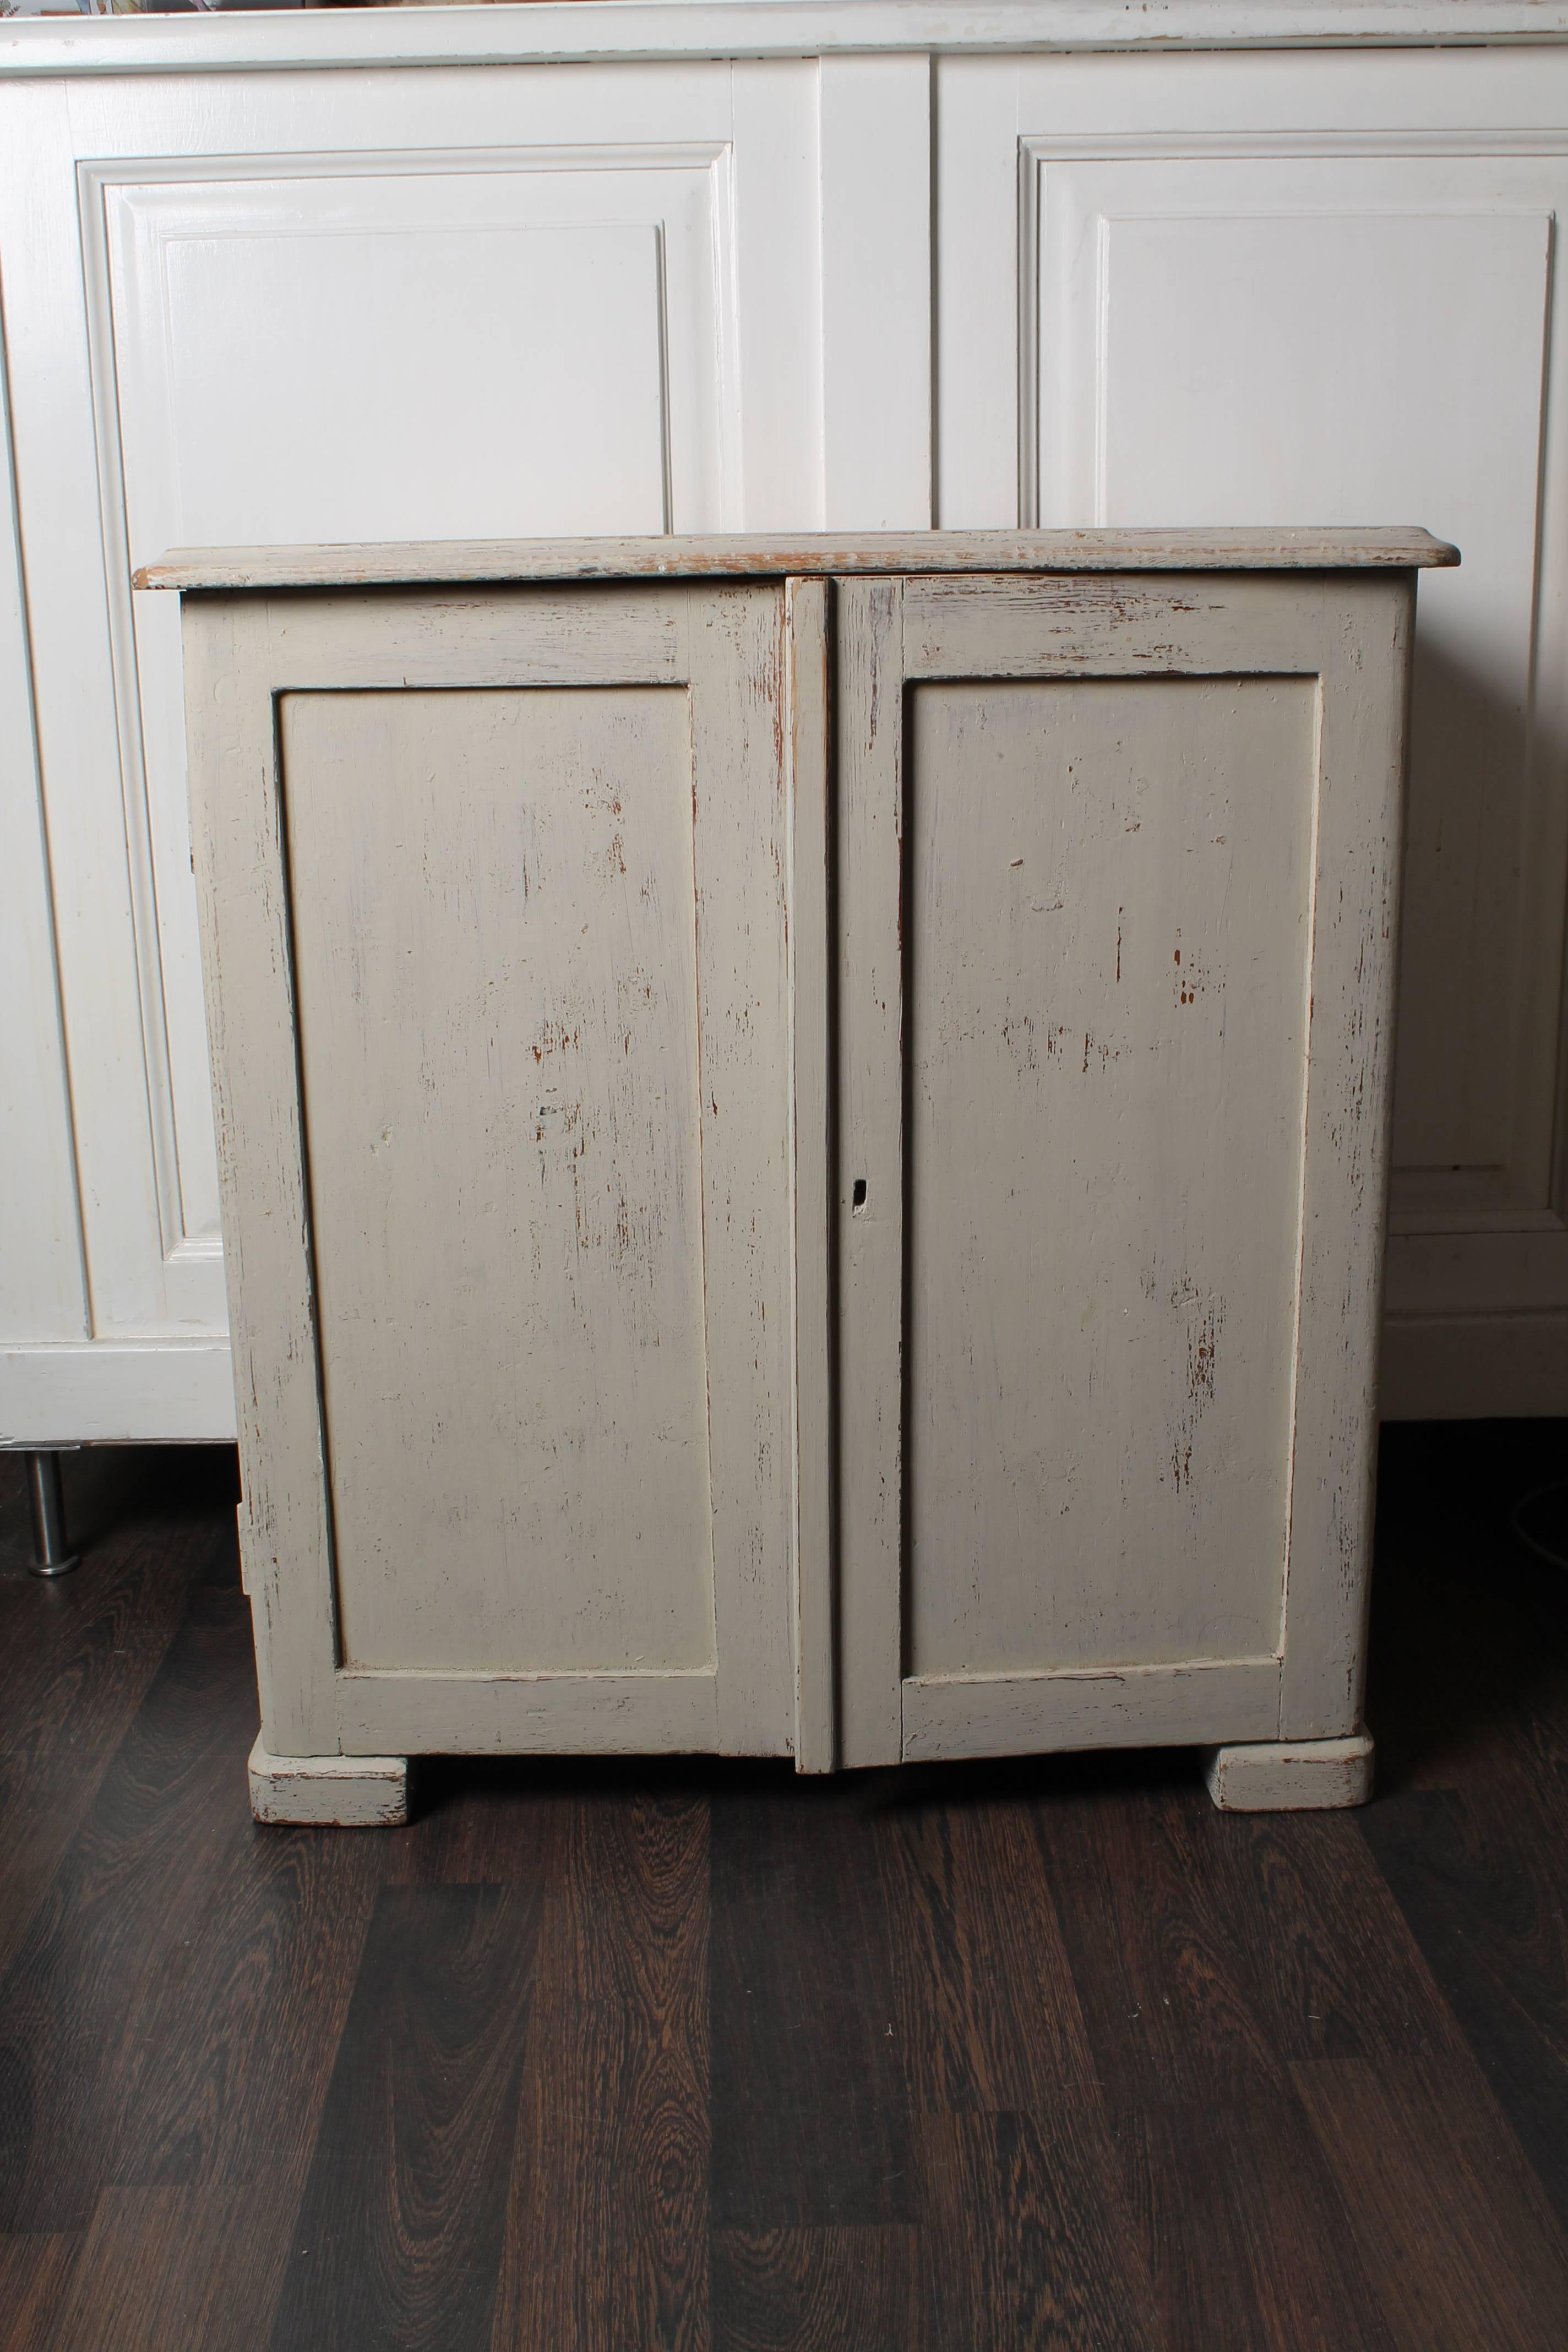 19th century Swedish cabinet with drawers. Two drawers behind doors. Later grey painting.